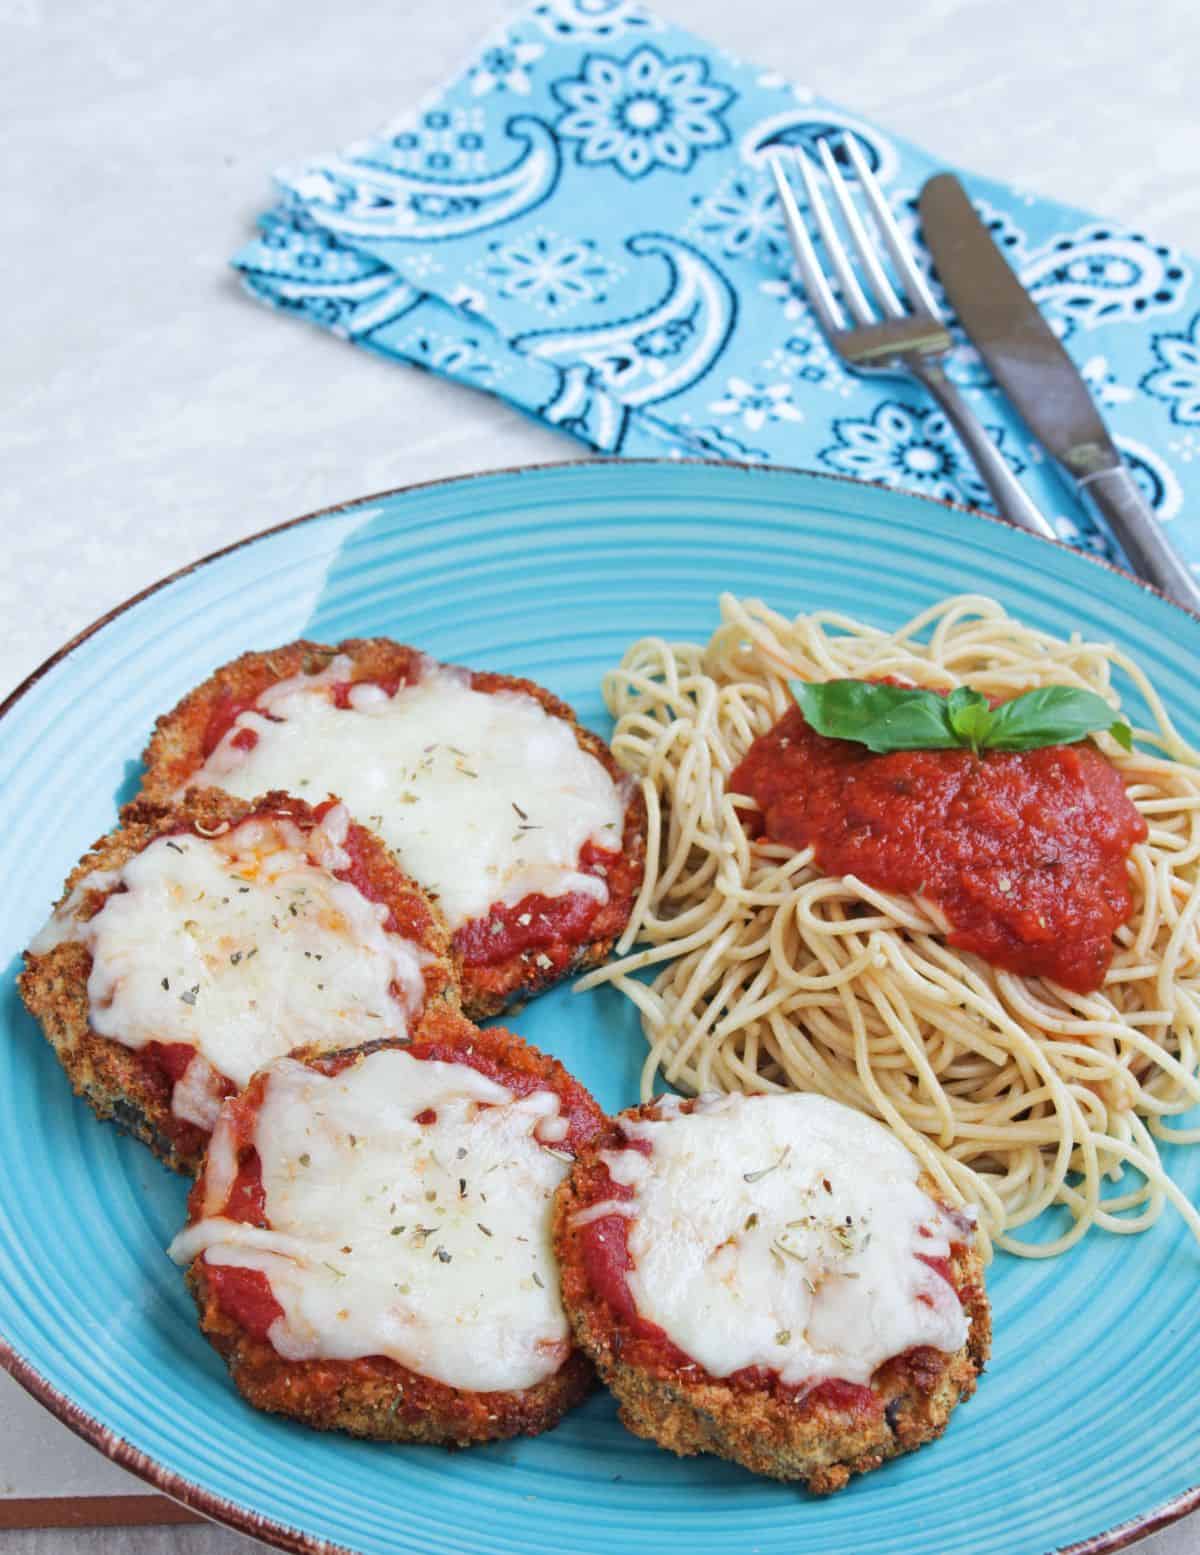 Eggplant parmesan with melted cheese and spaghetti on a plate